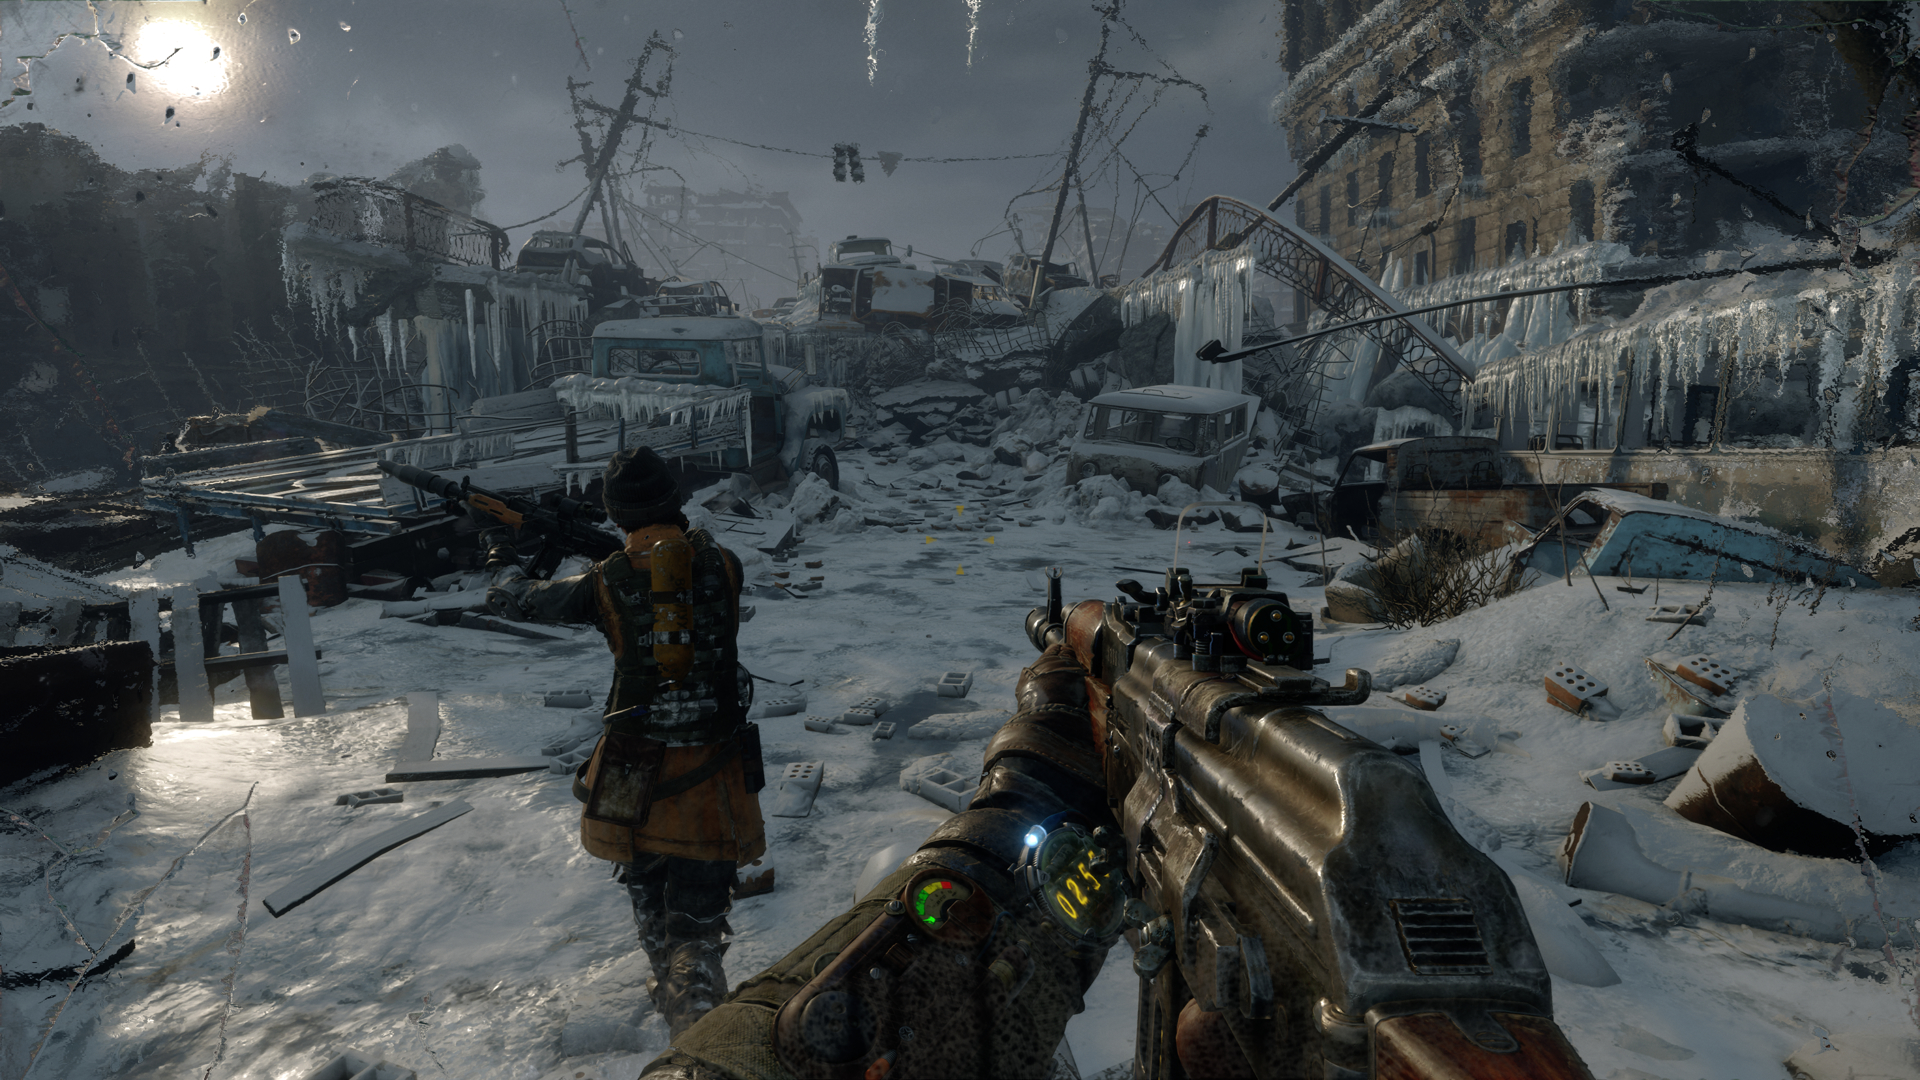 kjole alkohol George Bernard Metro Exodus Review: A Nuclear Hellscape That Lures You In | Digital Trends